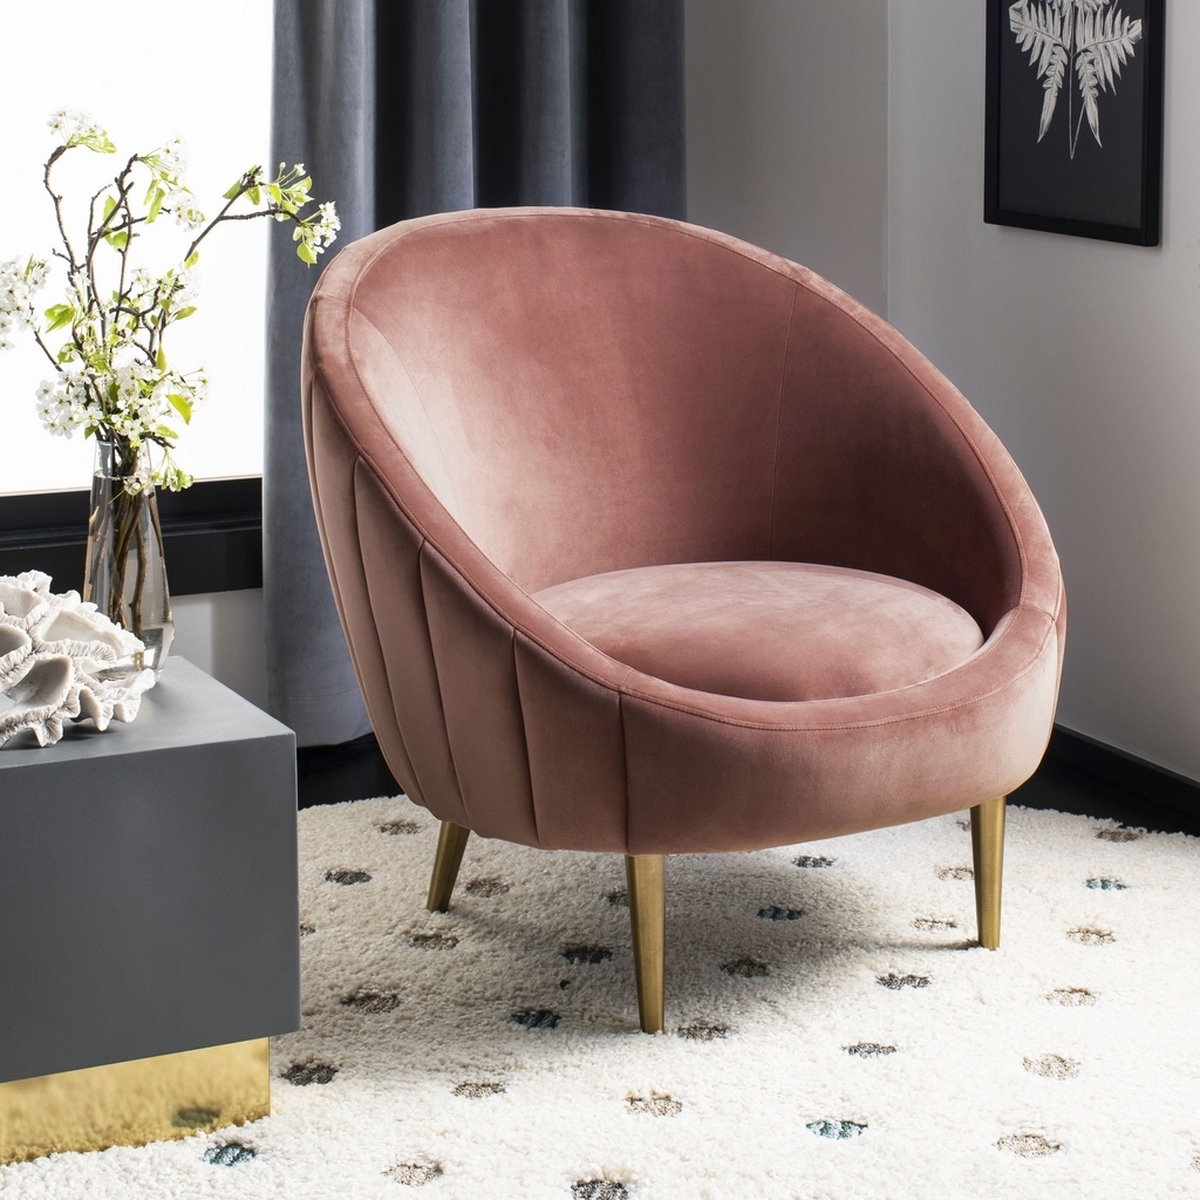 Razia Channel Tufted Tub Chair, Rose - Image 2